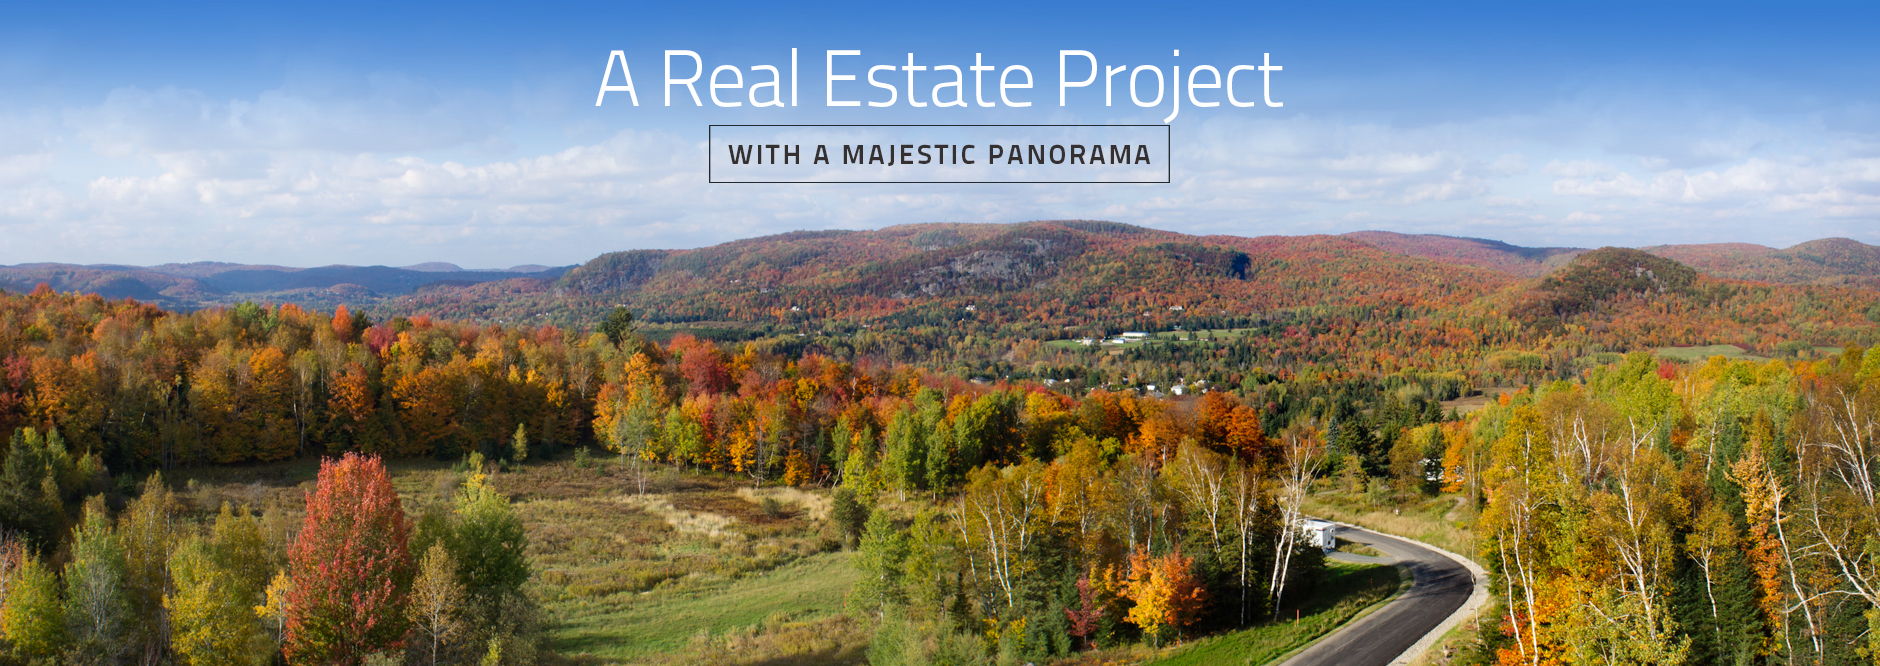 A Real Estate Project With a Majestic Panorama